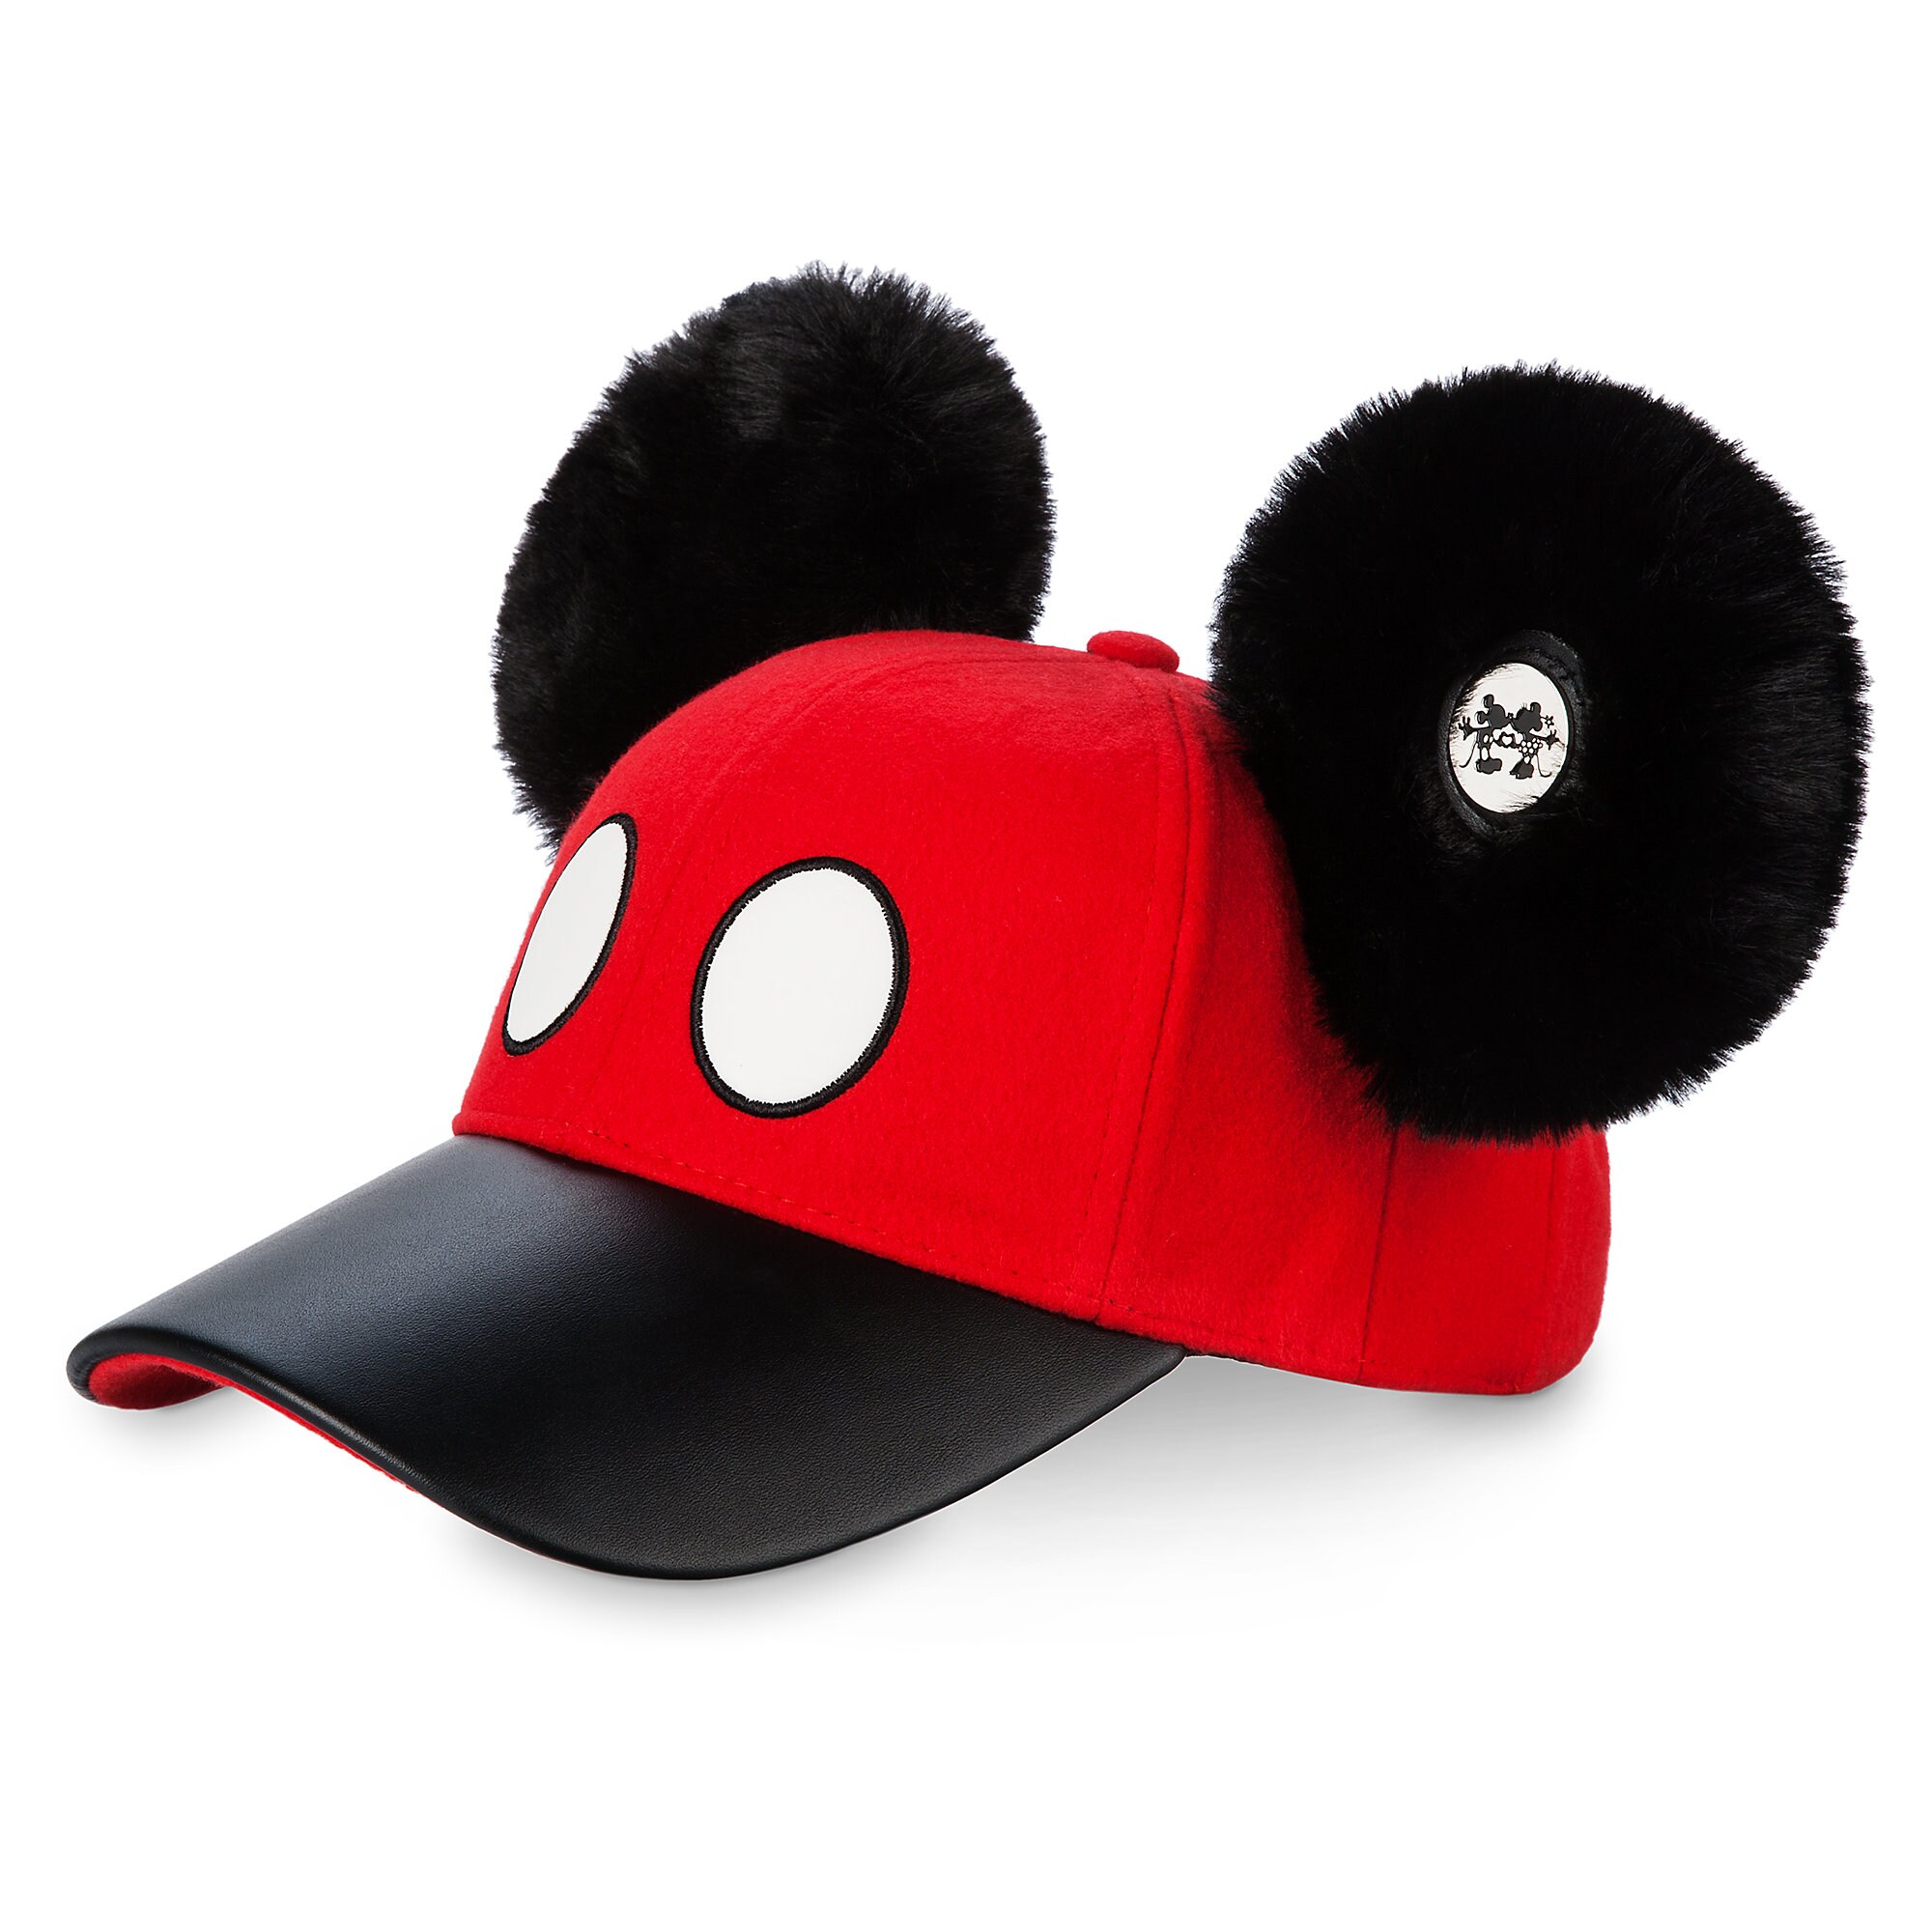 Mickey Mouse Fuzzy Ears Baseball Cap for Adults